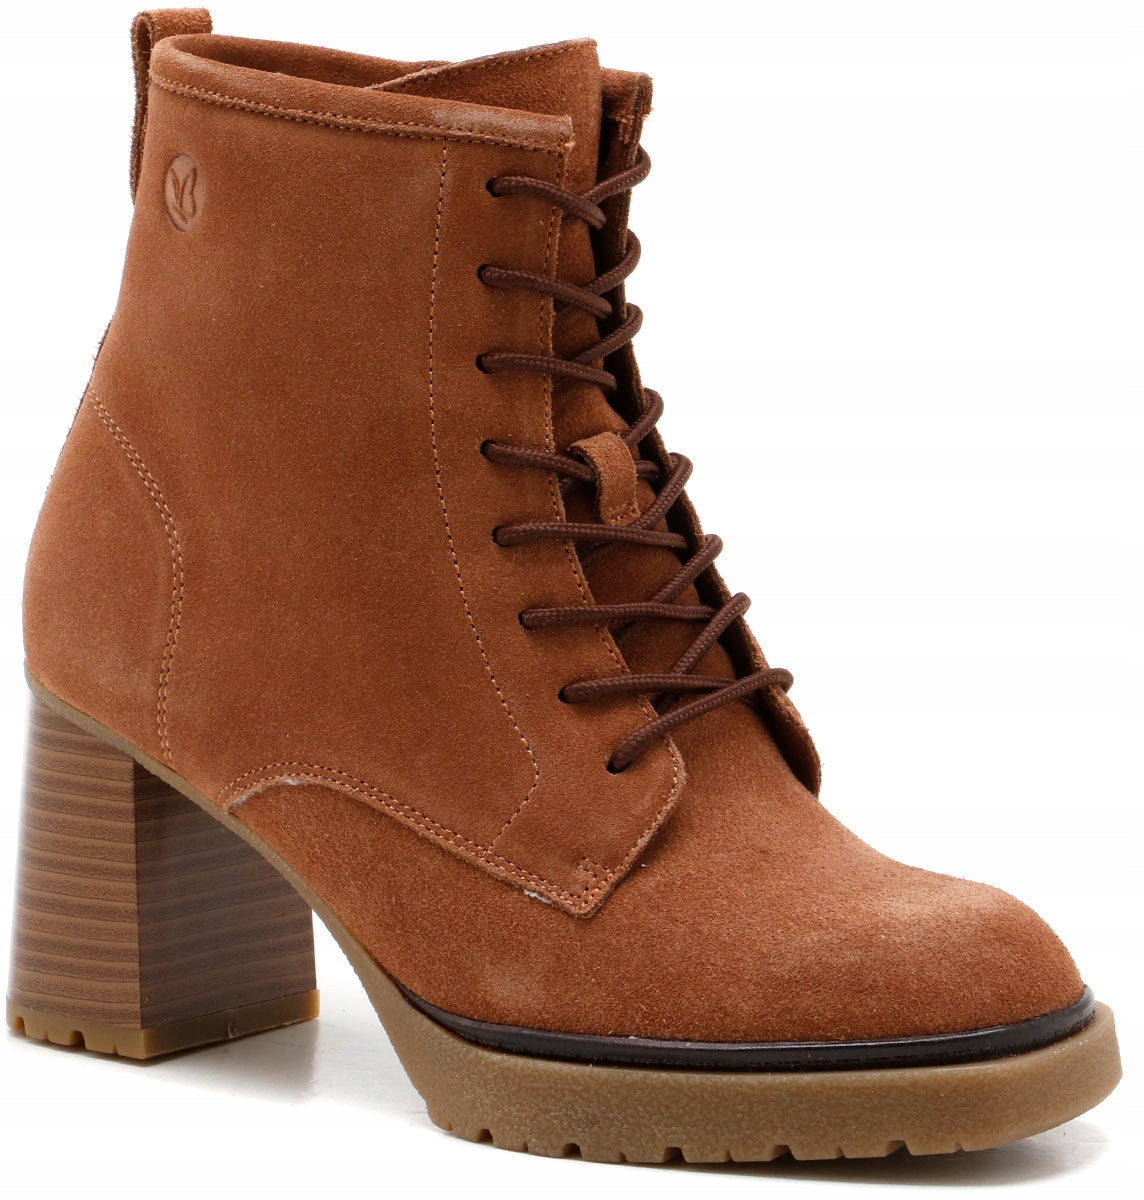 Caprice Cognac Suede Lace up ankle boots with Side Zip and Block heel.